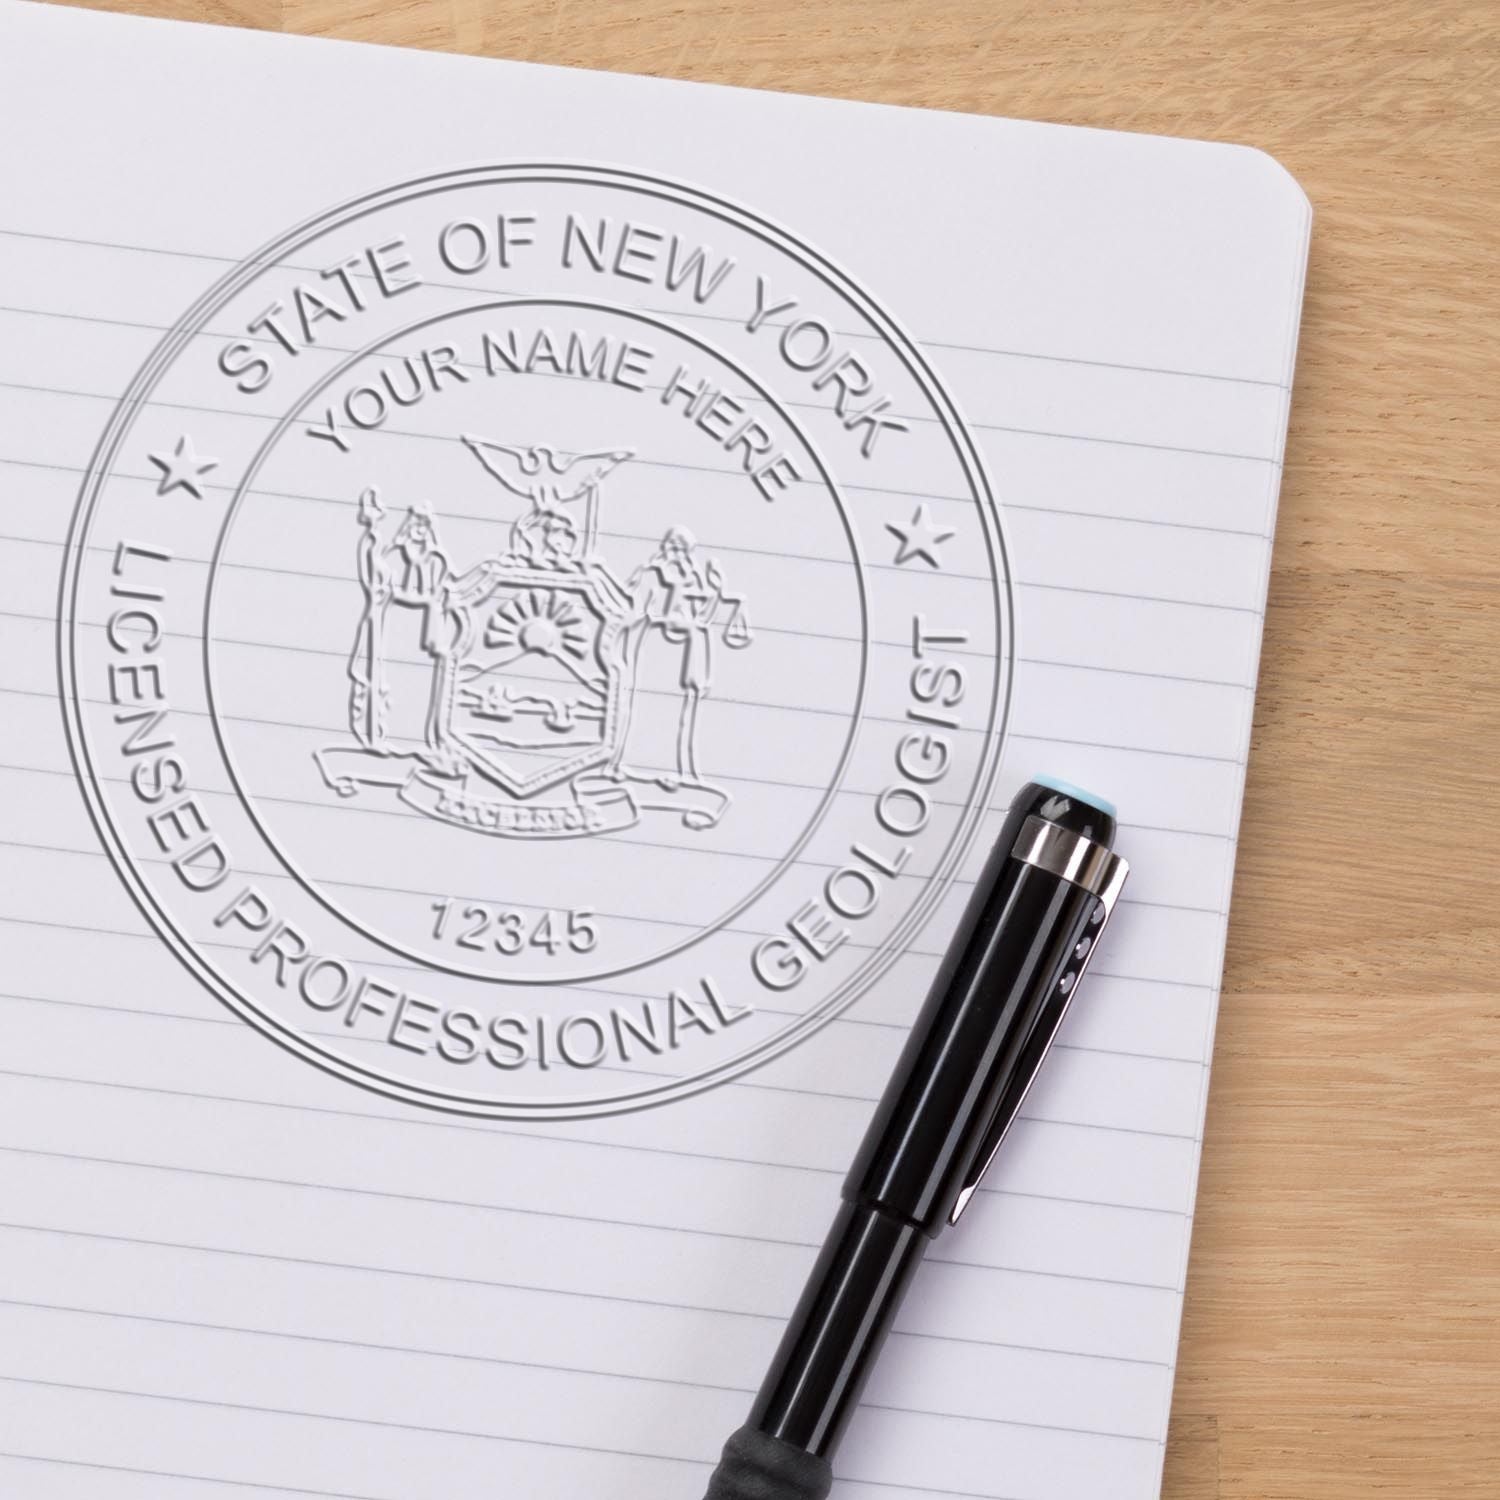 The main image for the Long Reach New York Geology Seal depicting a sample of the imprint and imprint sample